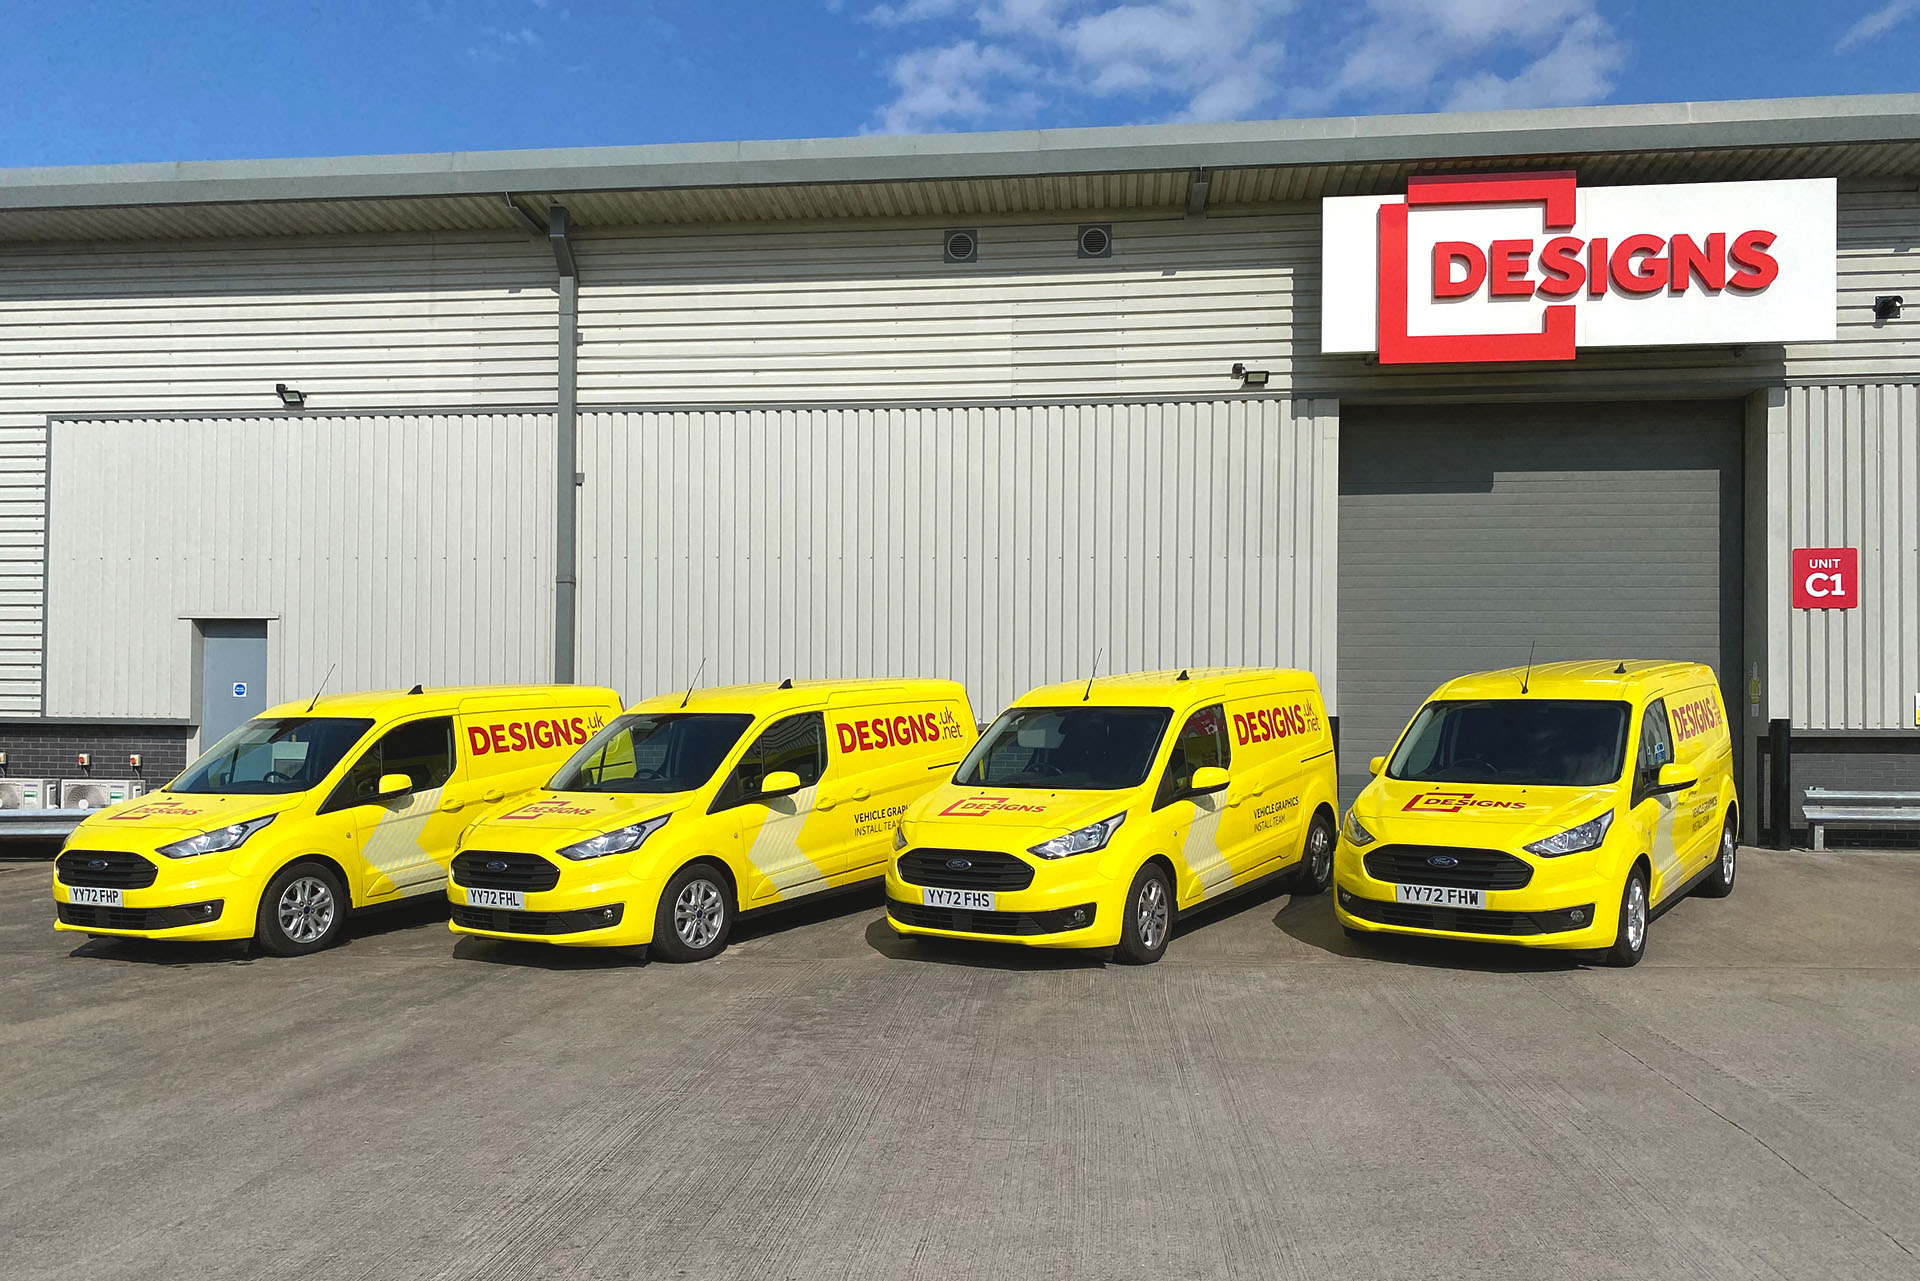 Yellow Ford Designs branded vans outside of the Designs office.